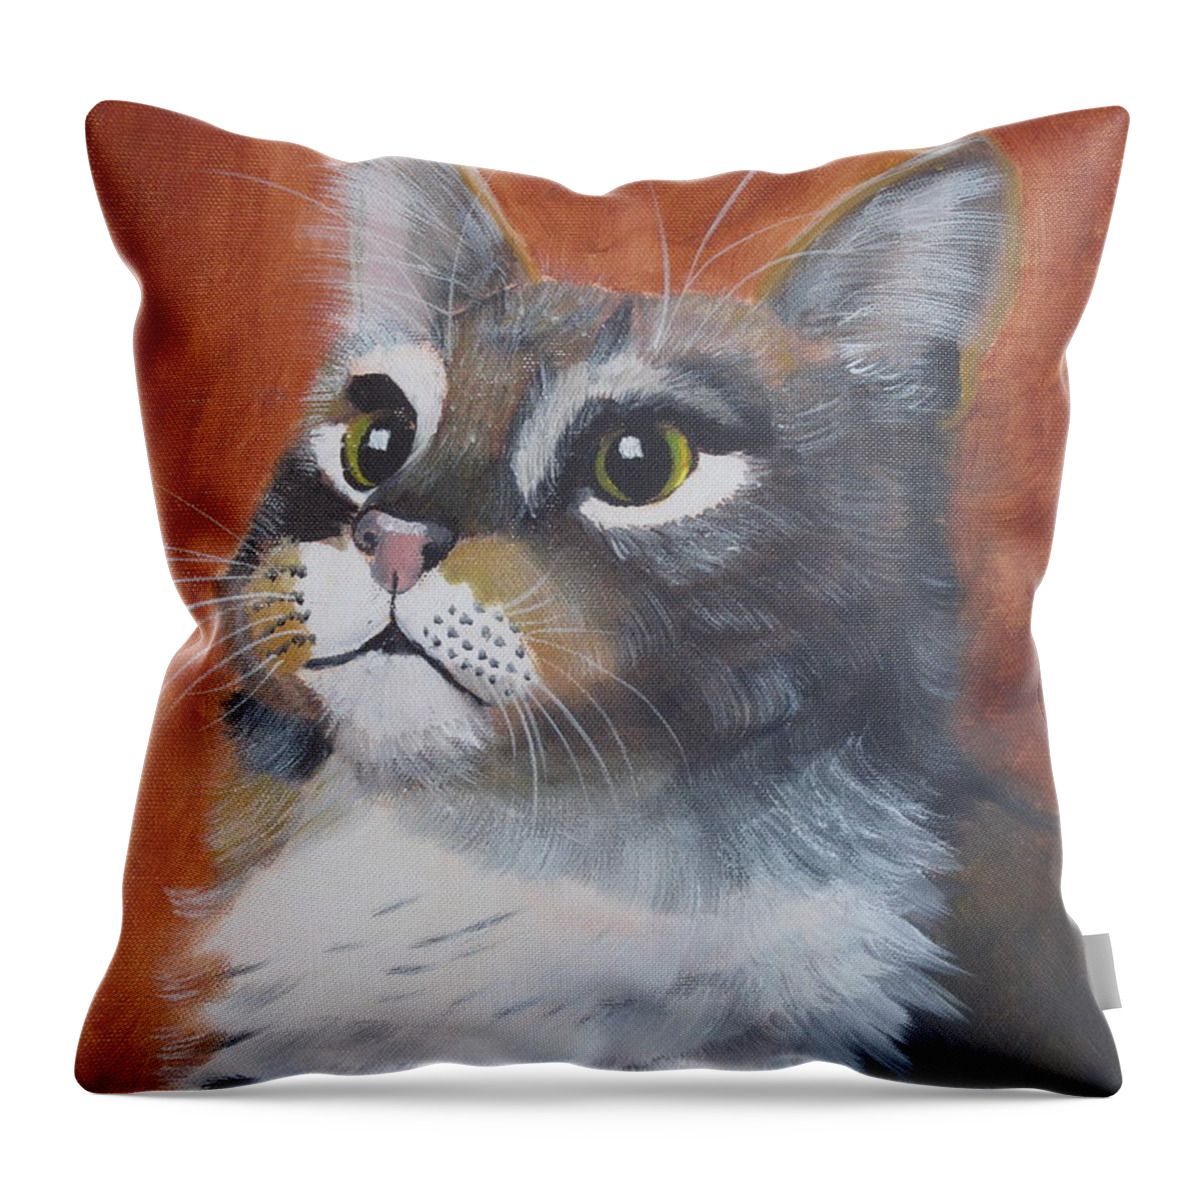 Pets Throw Pillow featuring the painting Wonder Cat by Kathie Camara